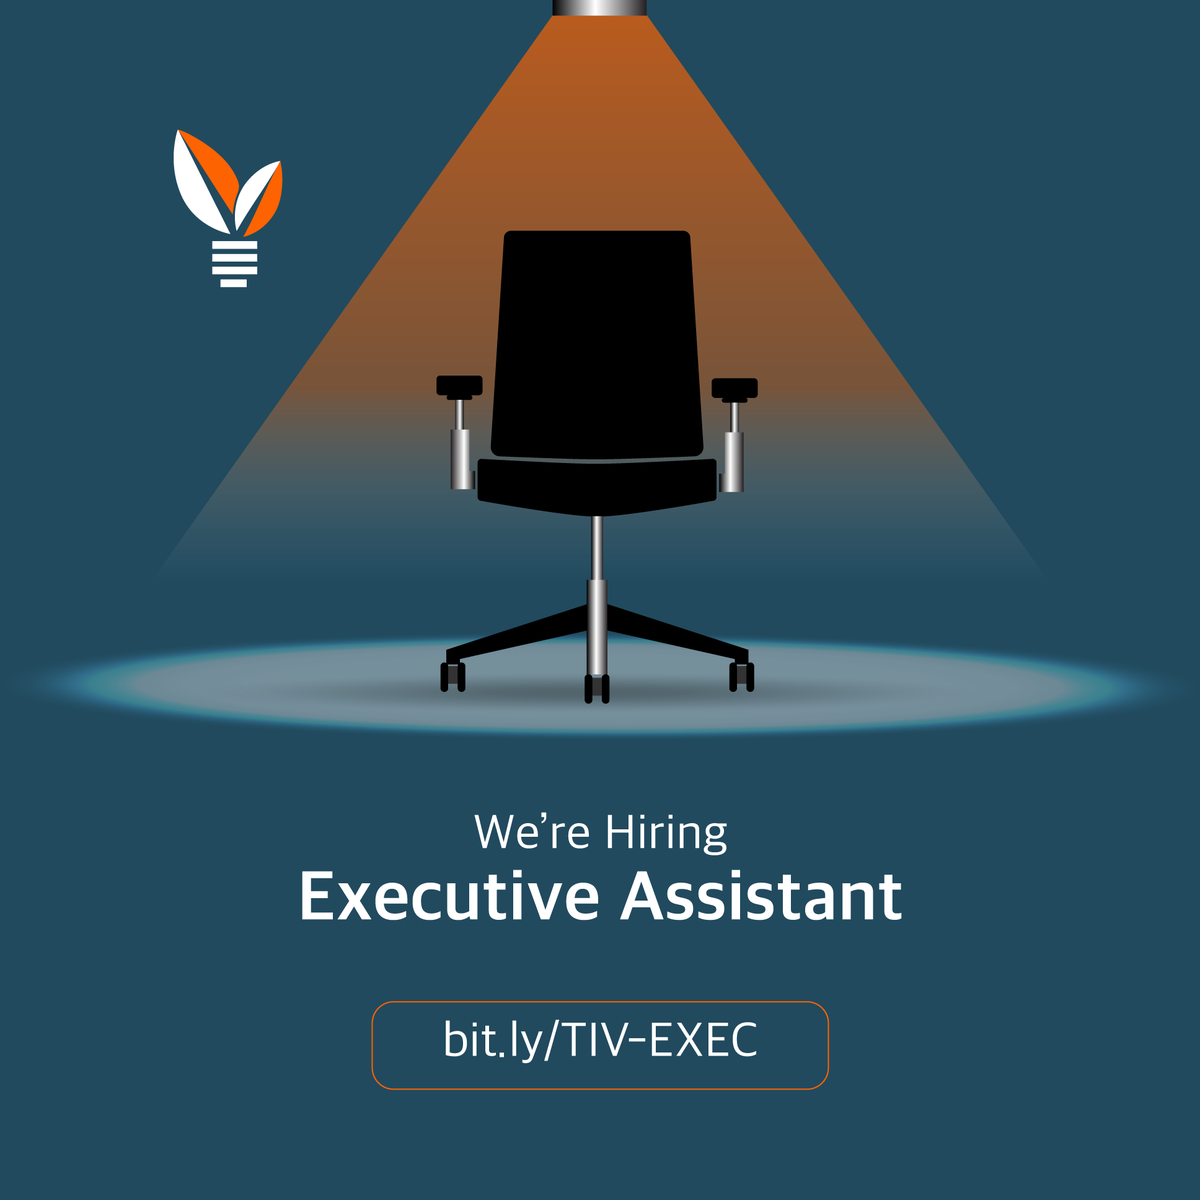 JOB ALERT! Looking for a dynamic and innovative work environment? Your search ends here! Join our team as an Executive Assistant and become the catalyst for innovation within our team. Apply now to be at the forefront of our dynamic workspace. Visit: bit.ly/TIV-EXEC